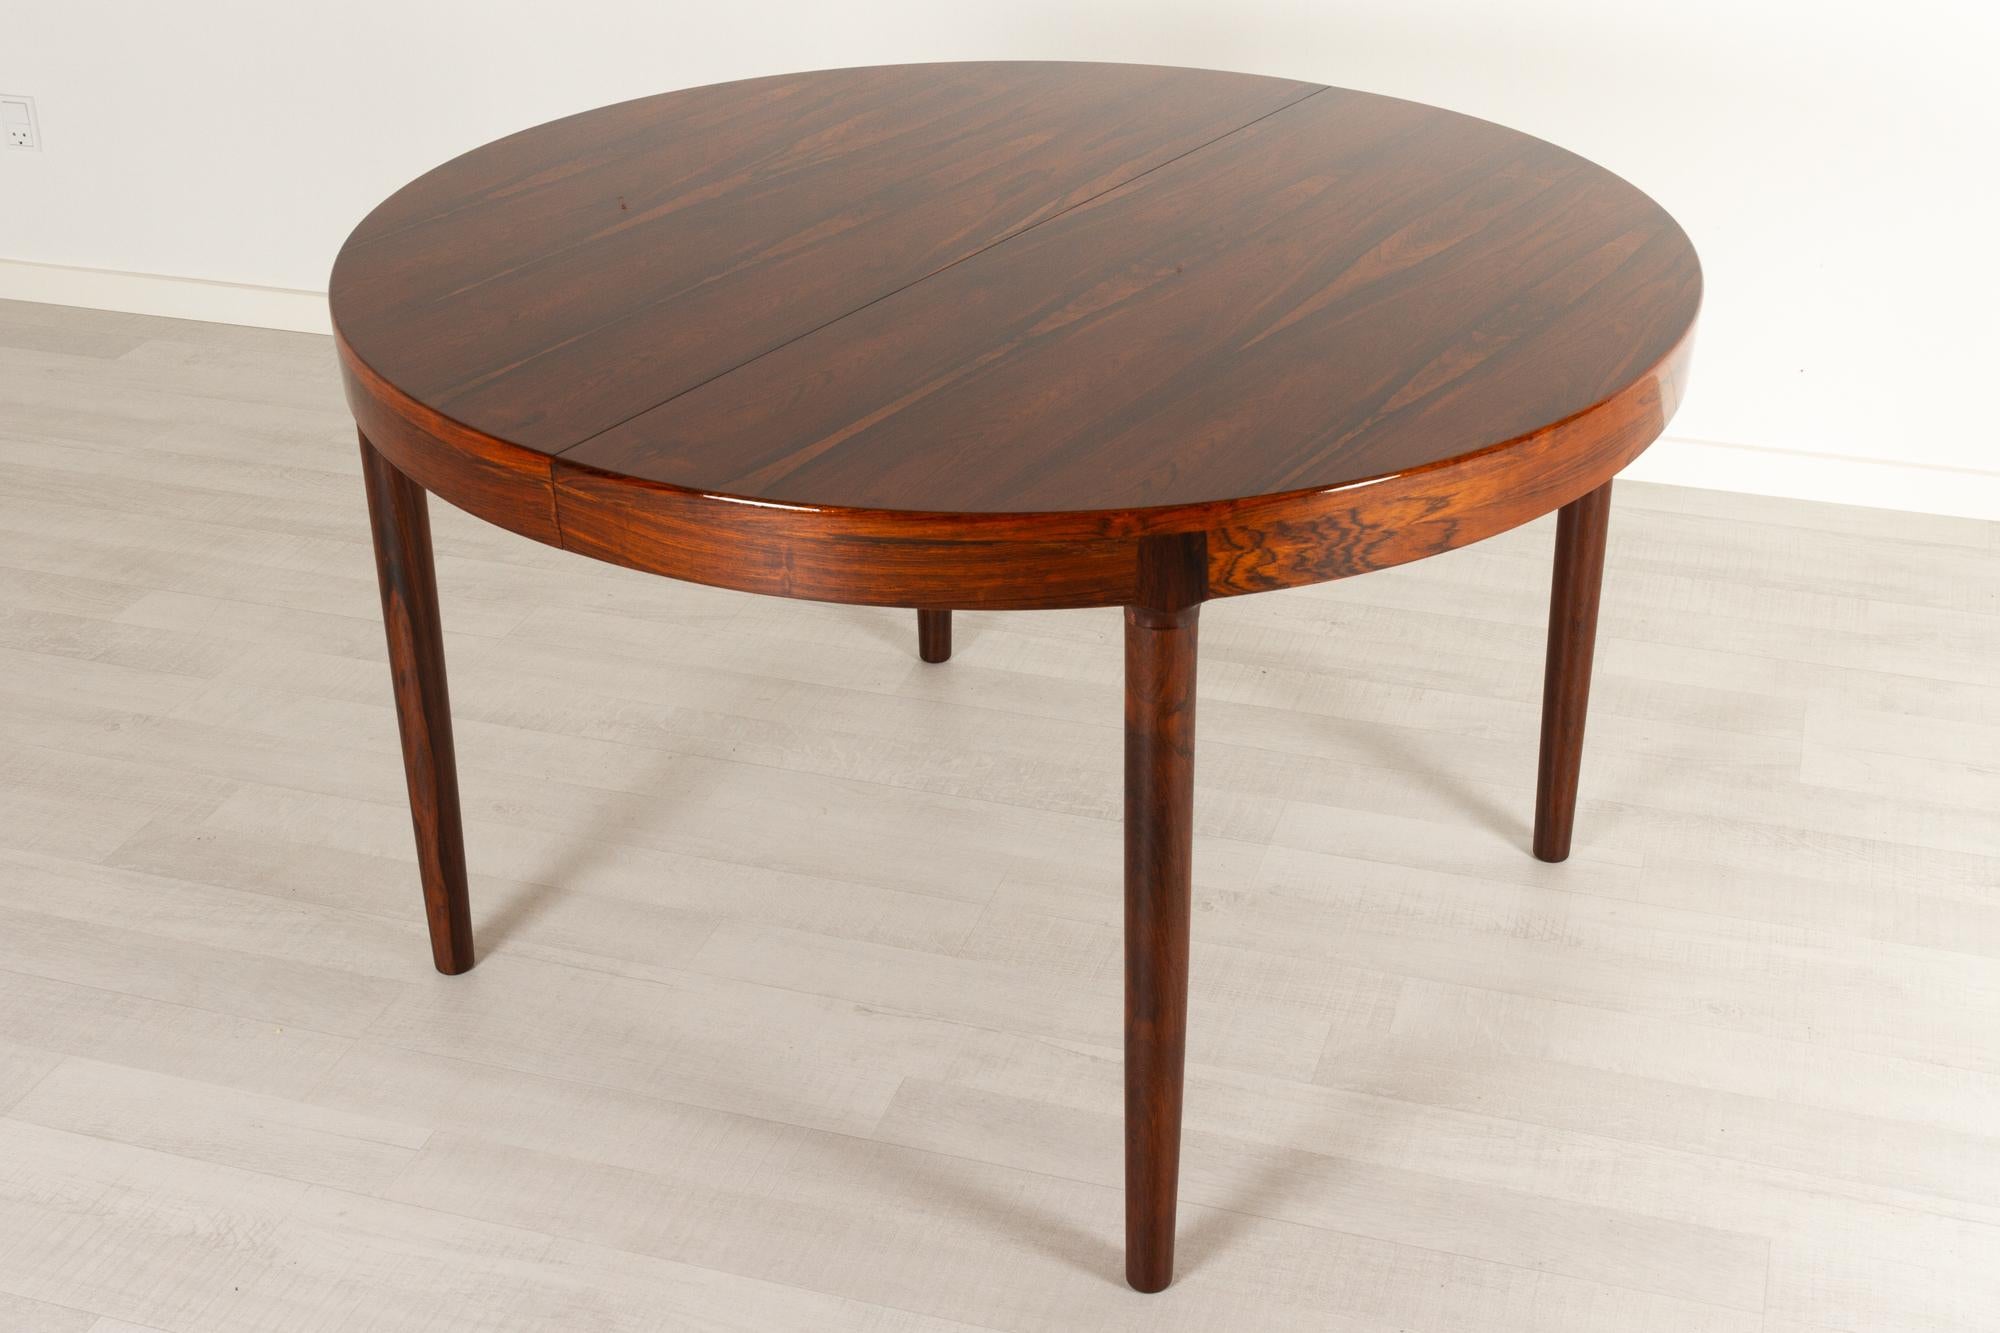 Vintage Danish round rosewood dining table by Harry Østergaard for Randers Møbelfabrik, Denmark, 1960s.
Mid-Century Modern circular dining table with stunning rosewood veneer. The table has a spectacular grain pattern and a very minimalistic design